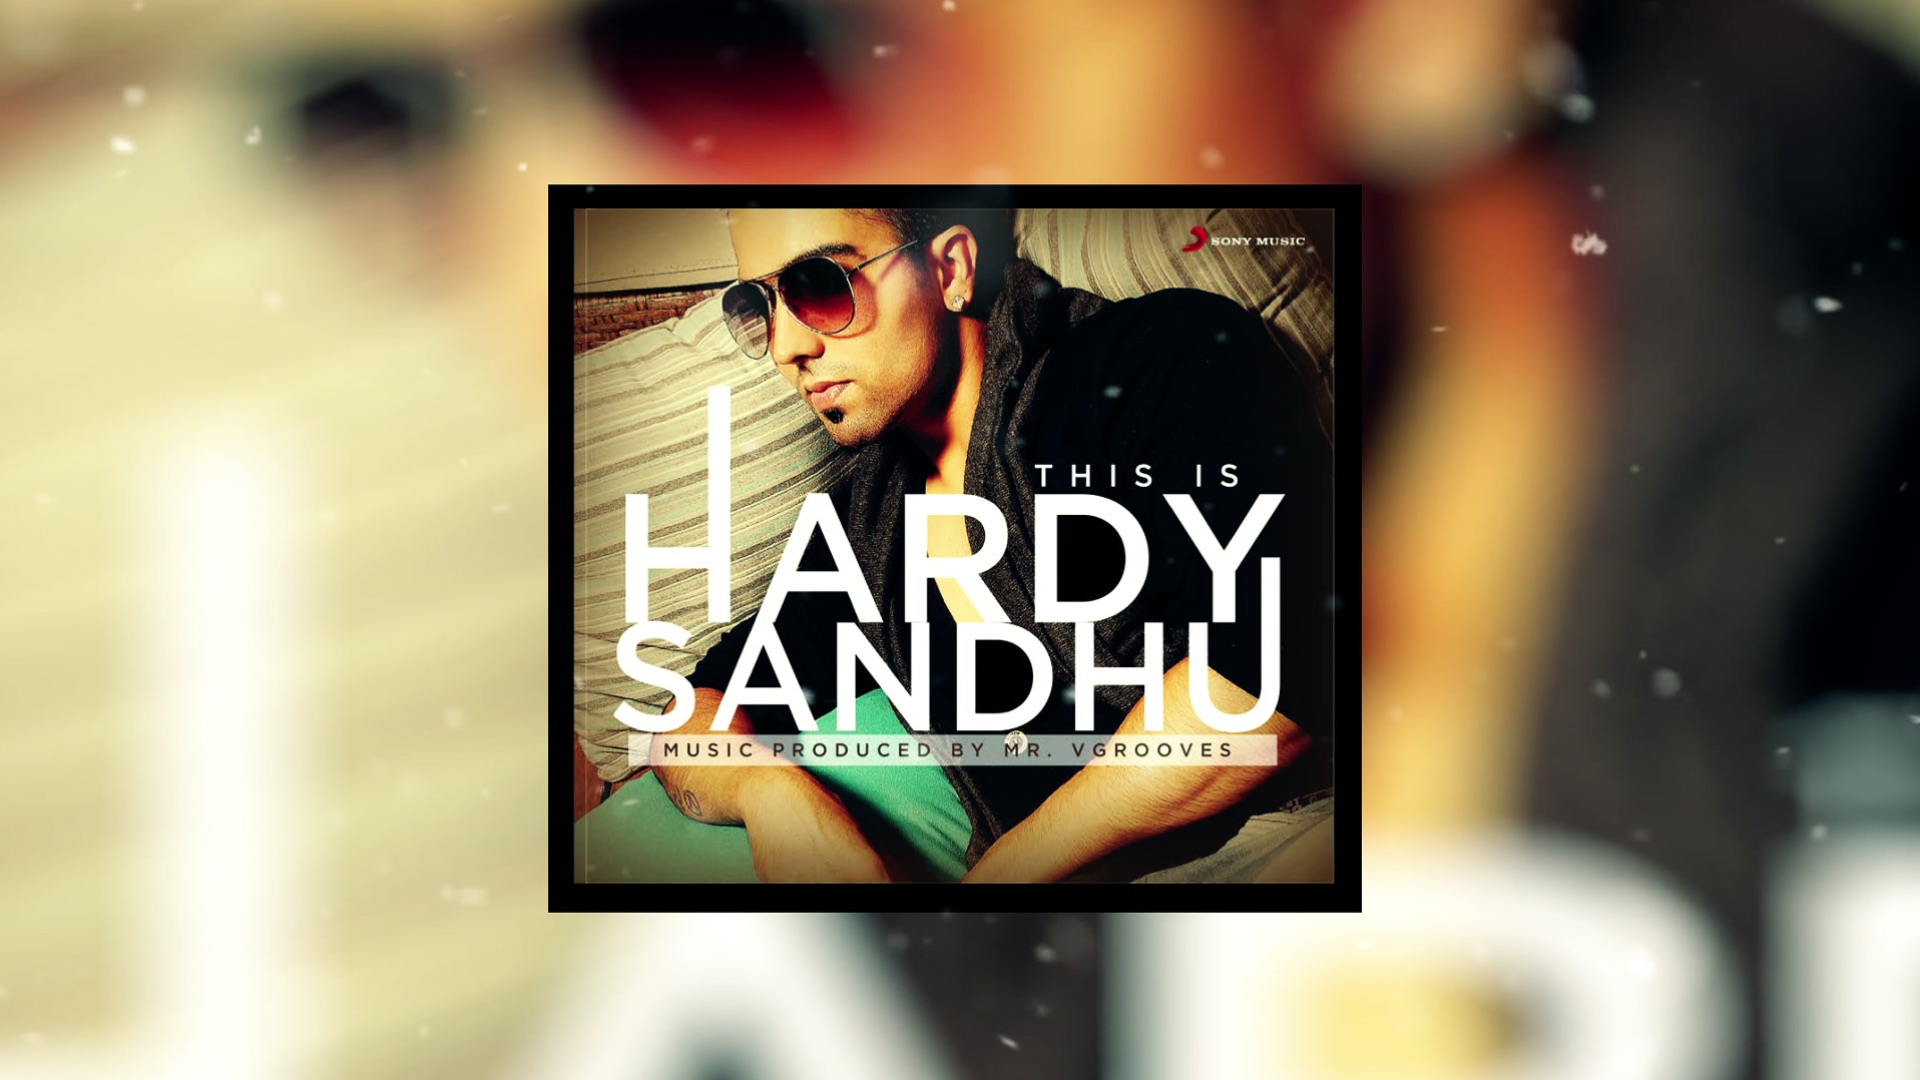 Book / Hire SINGER Hardy Sandhu for Events in Best Prices - StarClinch